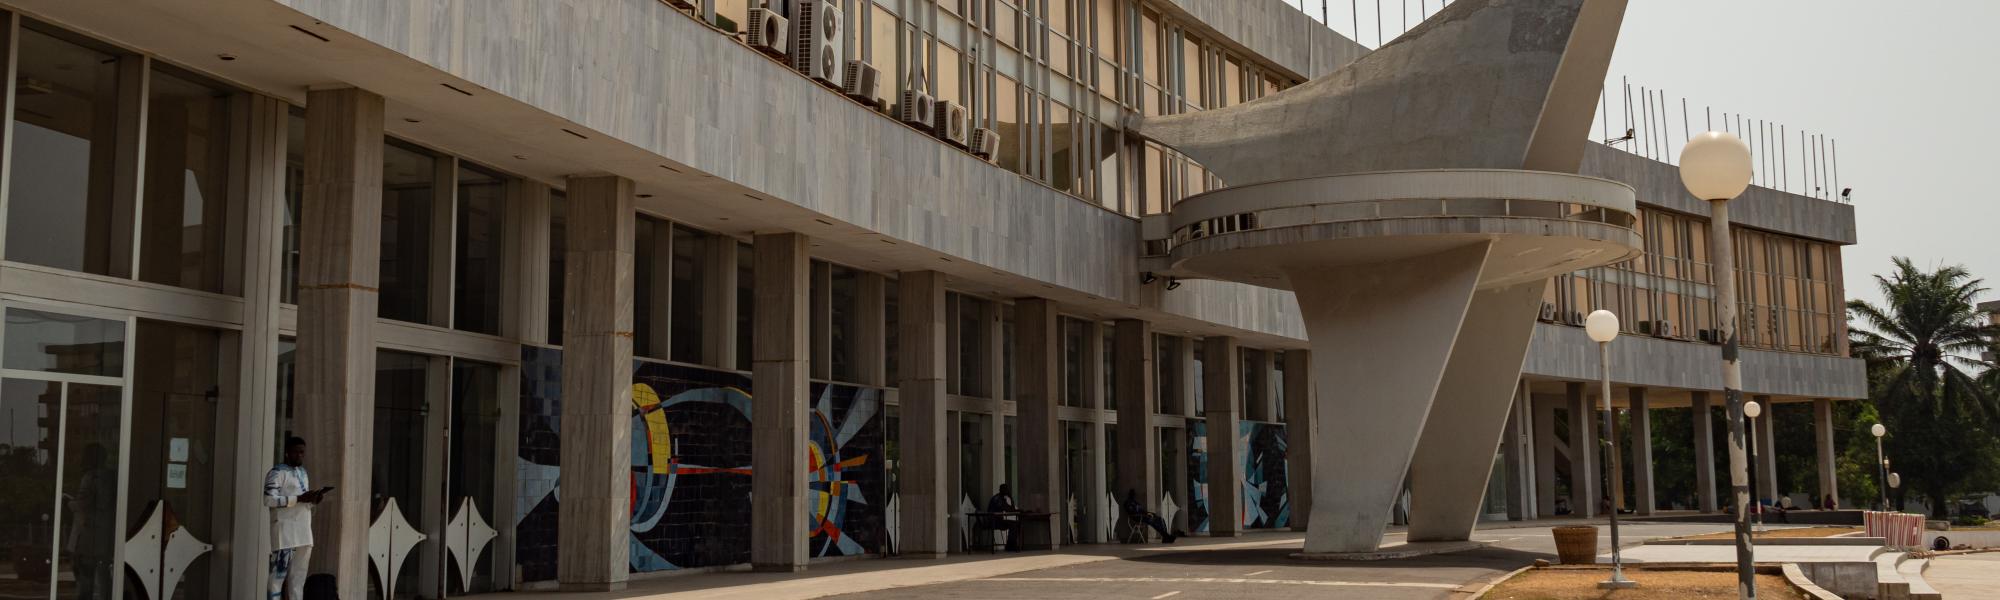 Togo adopts new law developed by IRU and World Bank to modernise transport